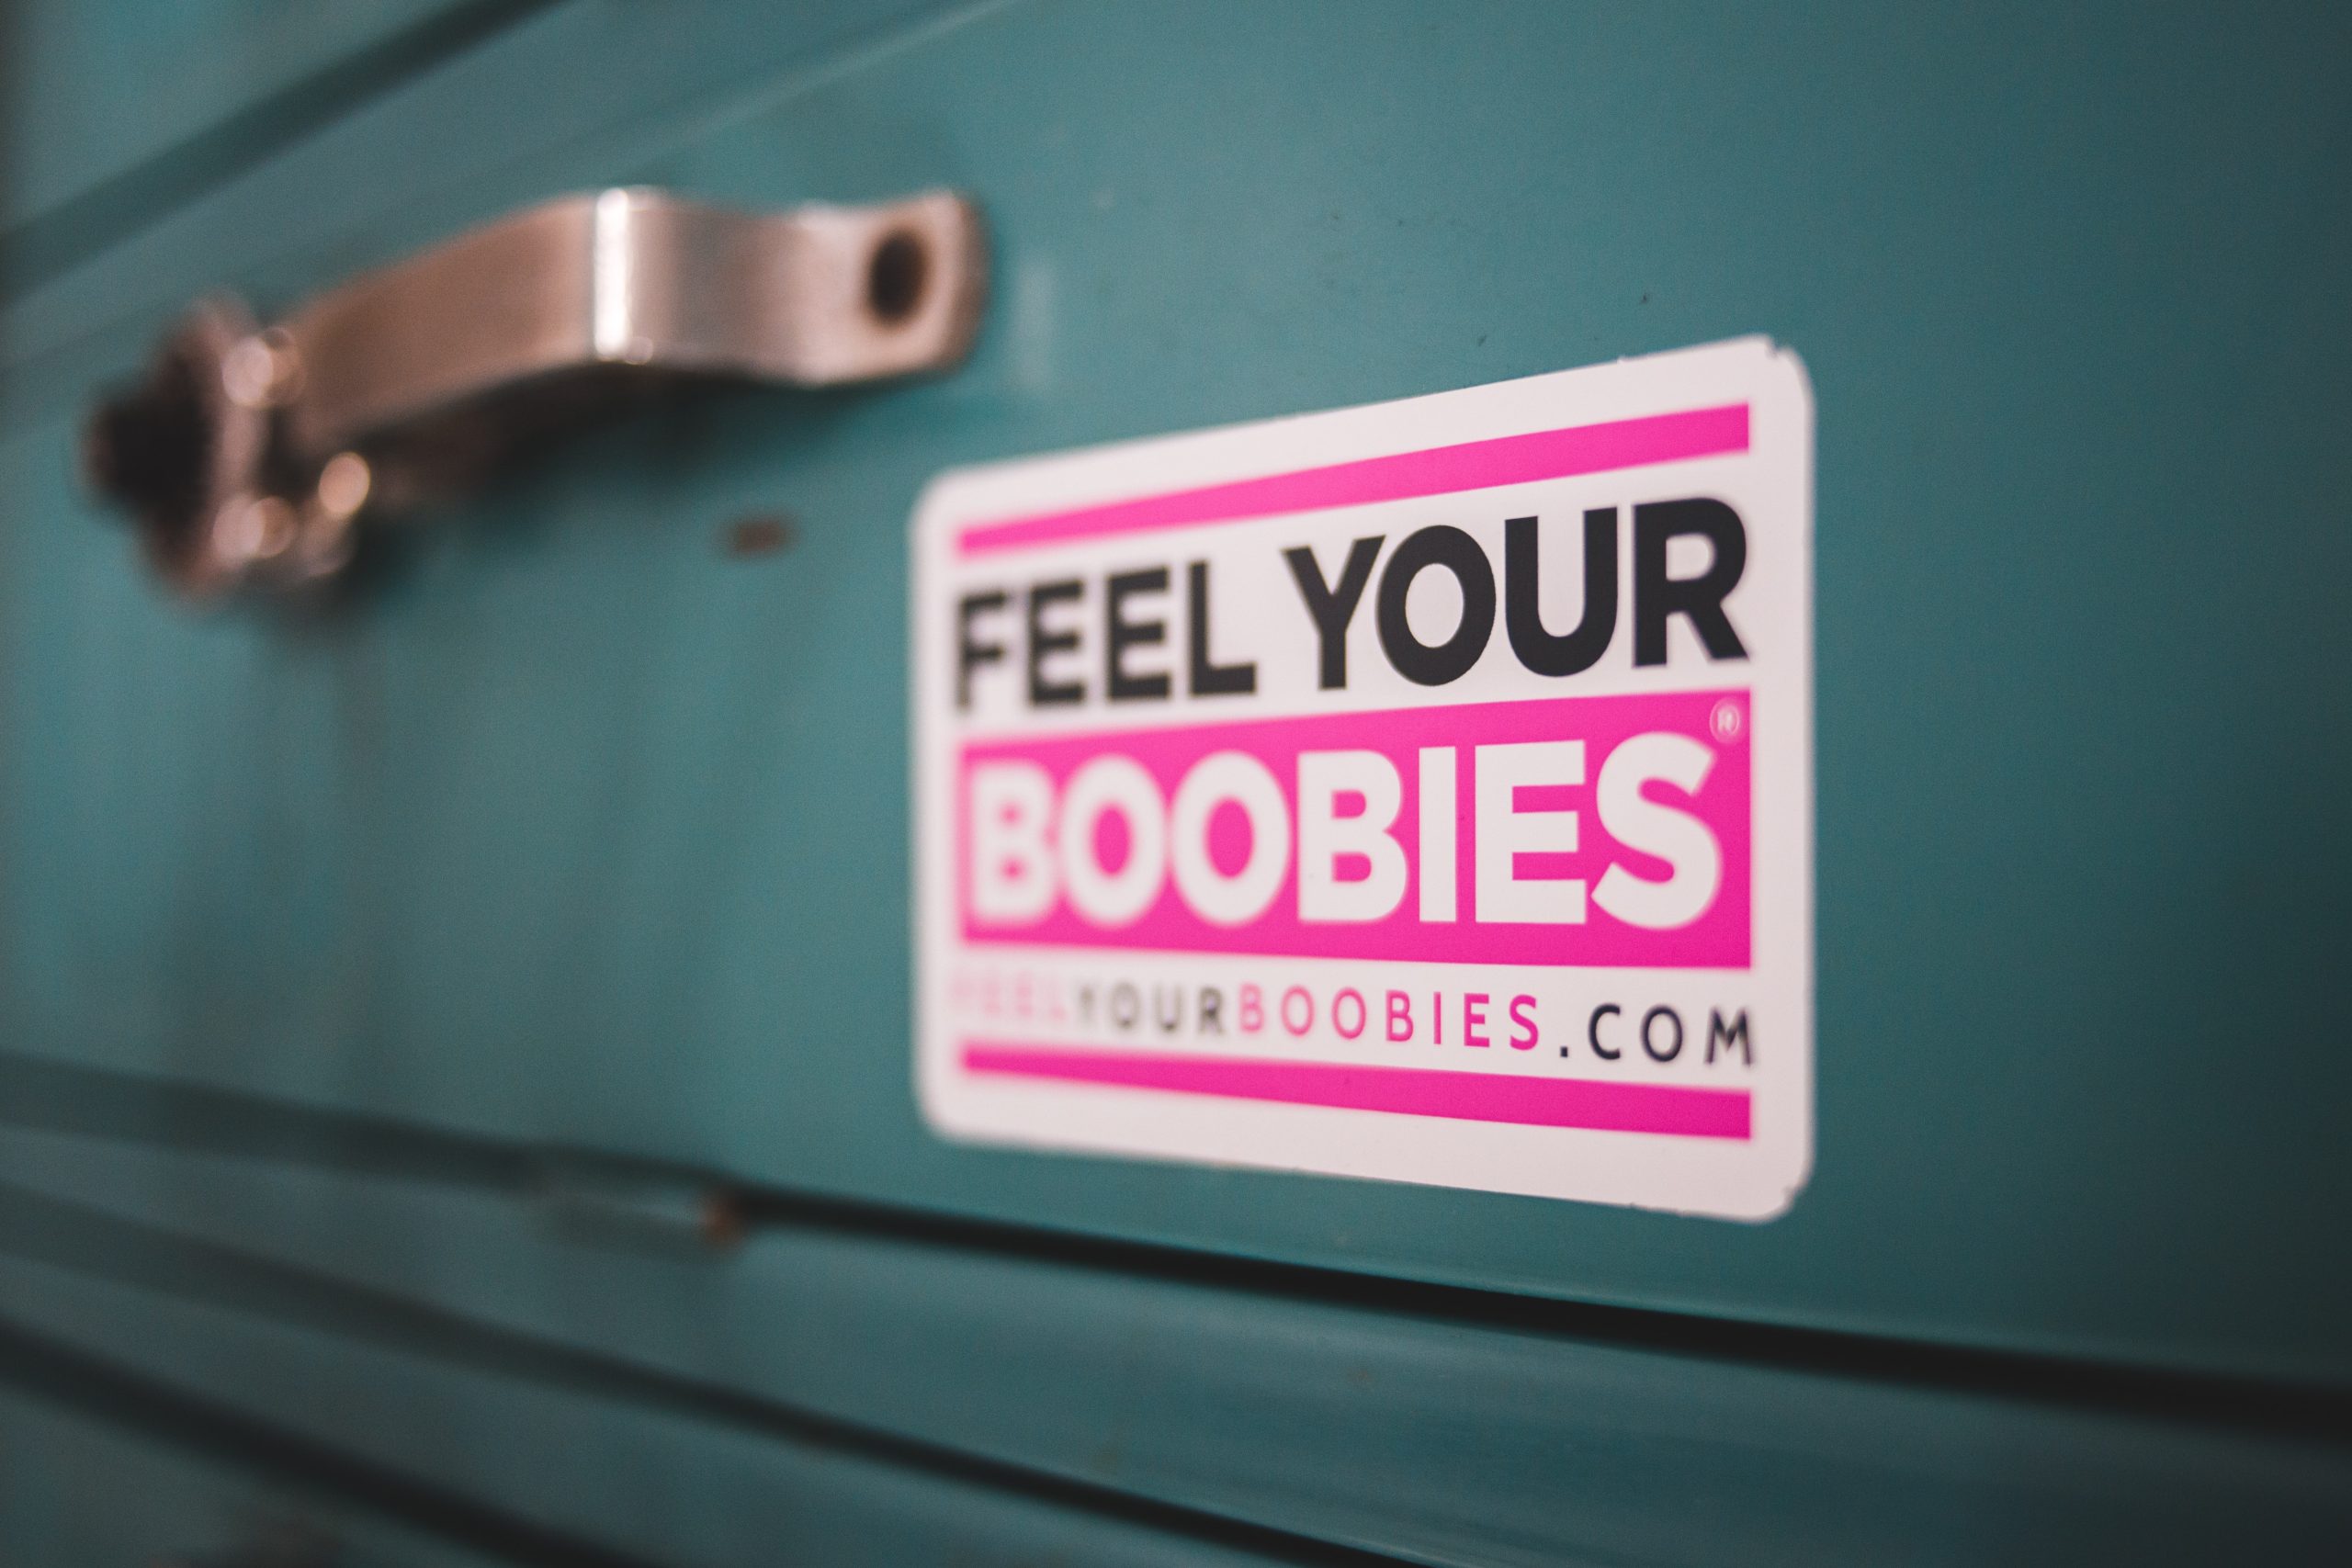 feel your boobies sticker on an old teal car.